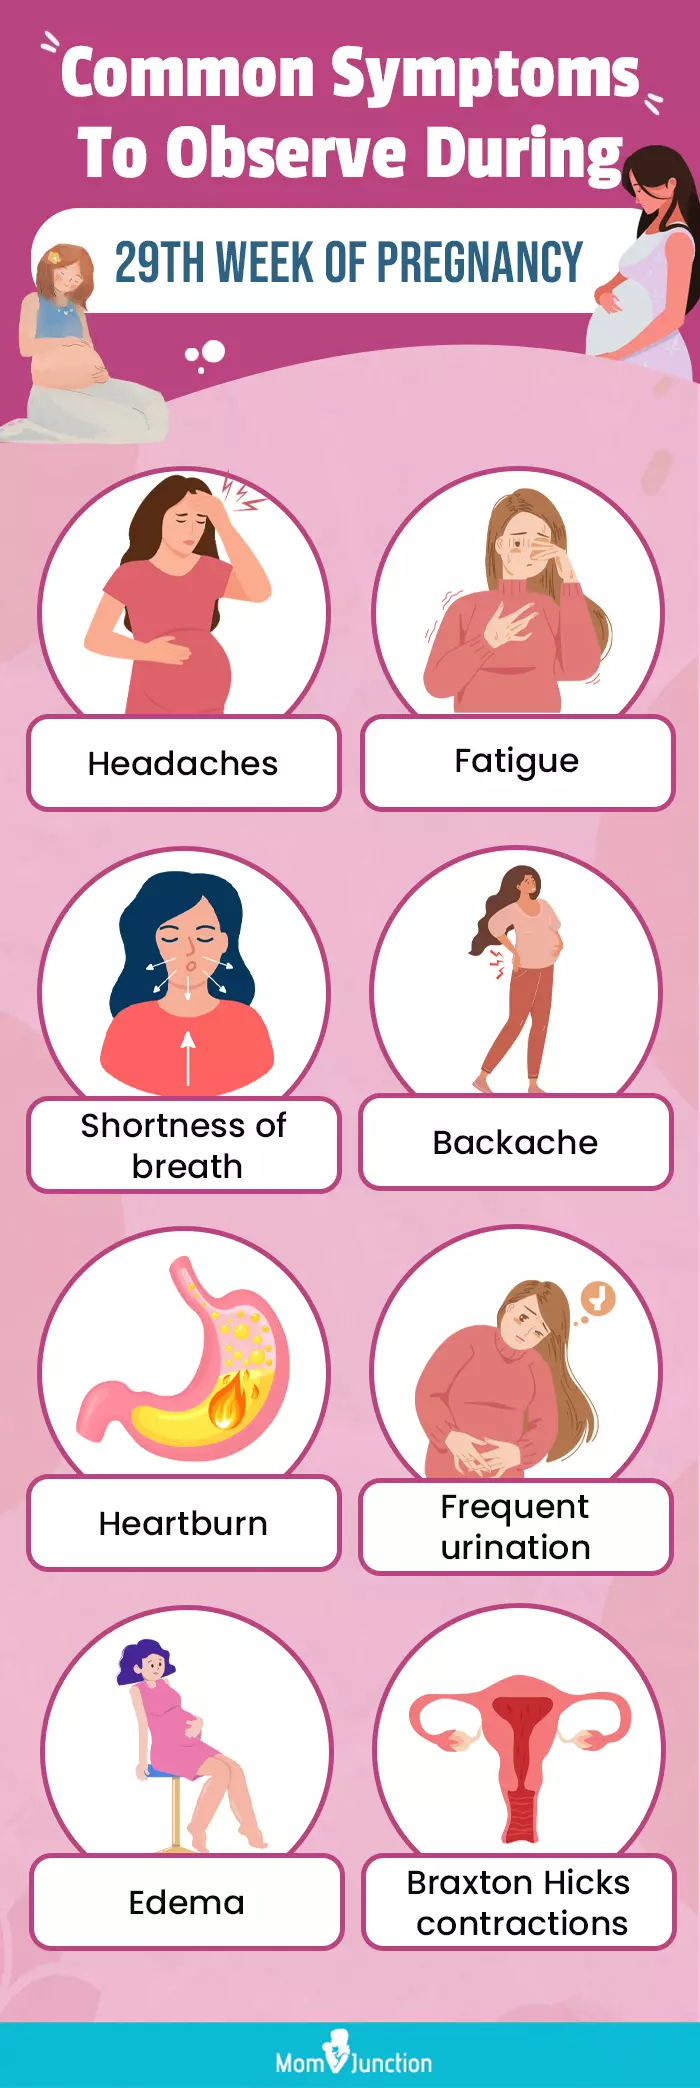 common symptoms to observe during 29th week of pregnancy (infographic)